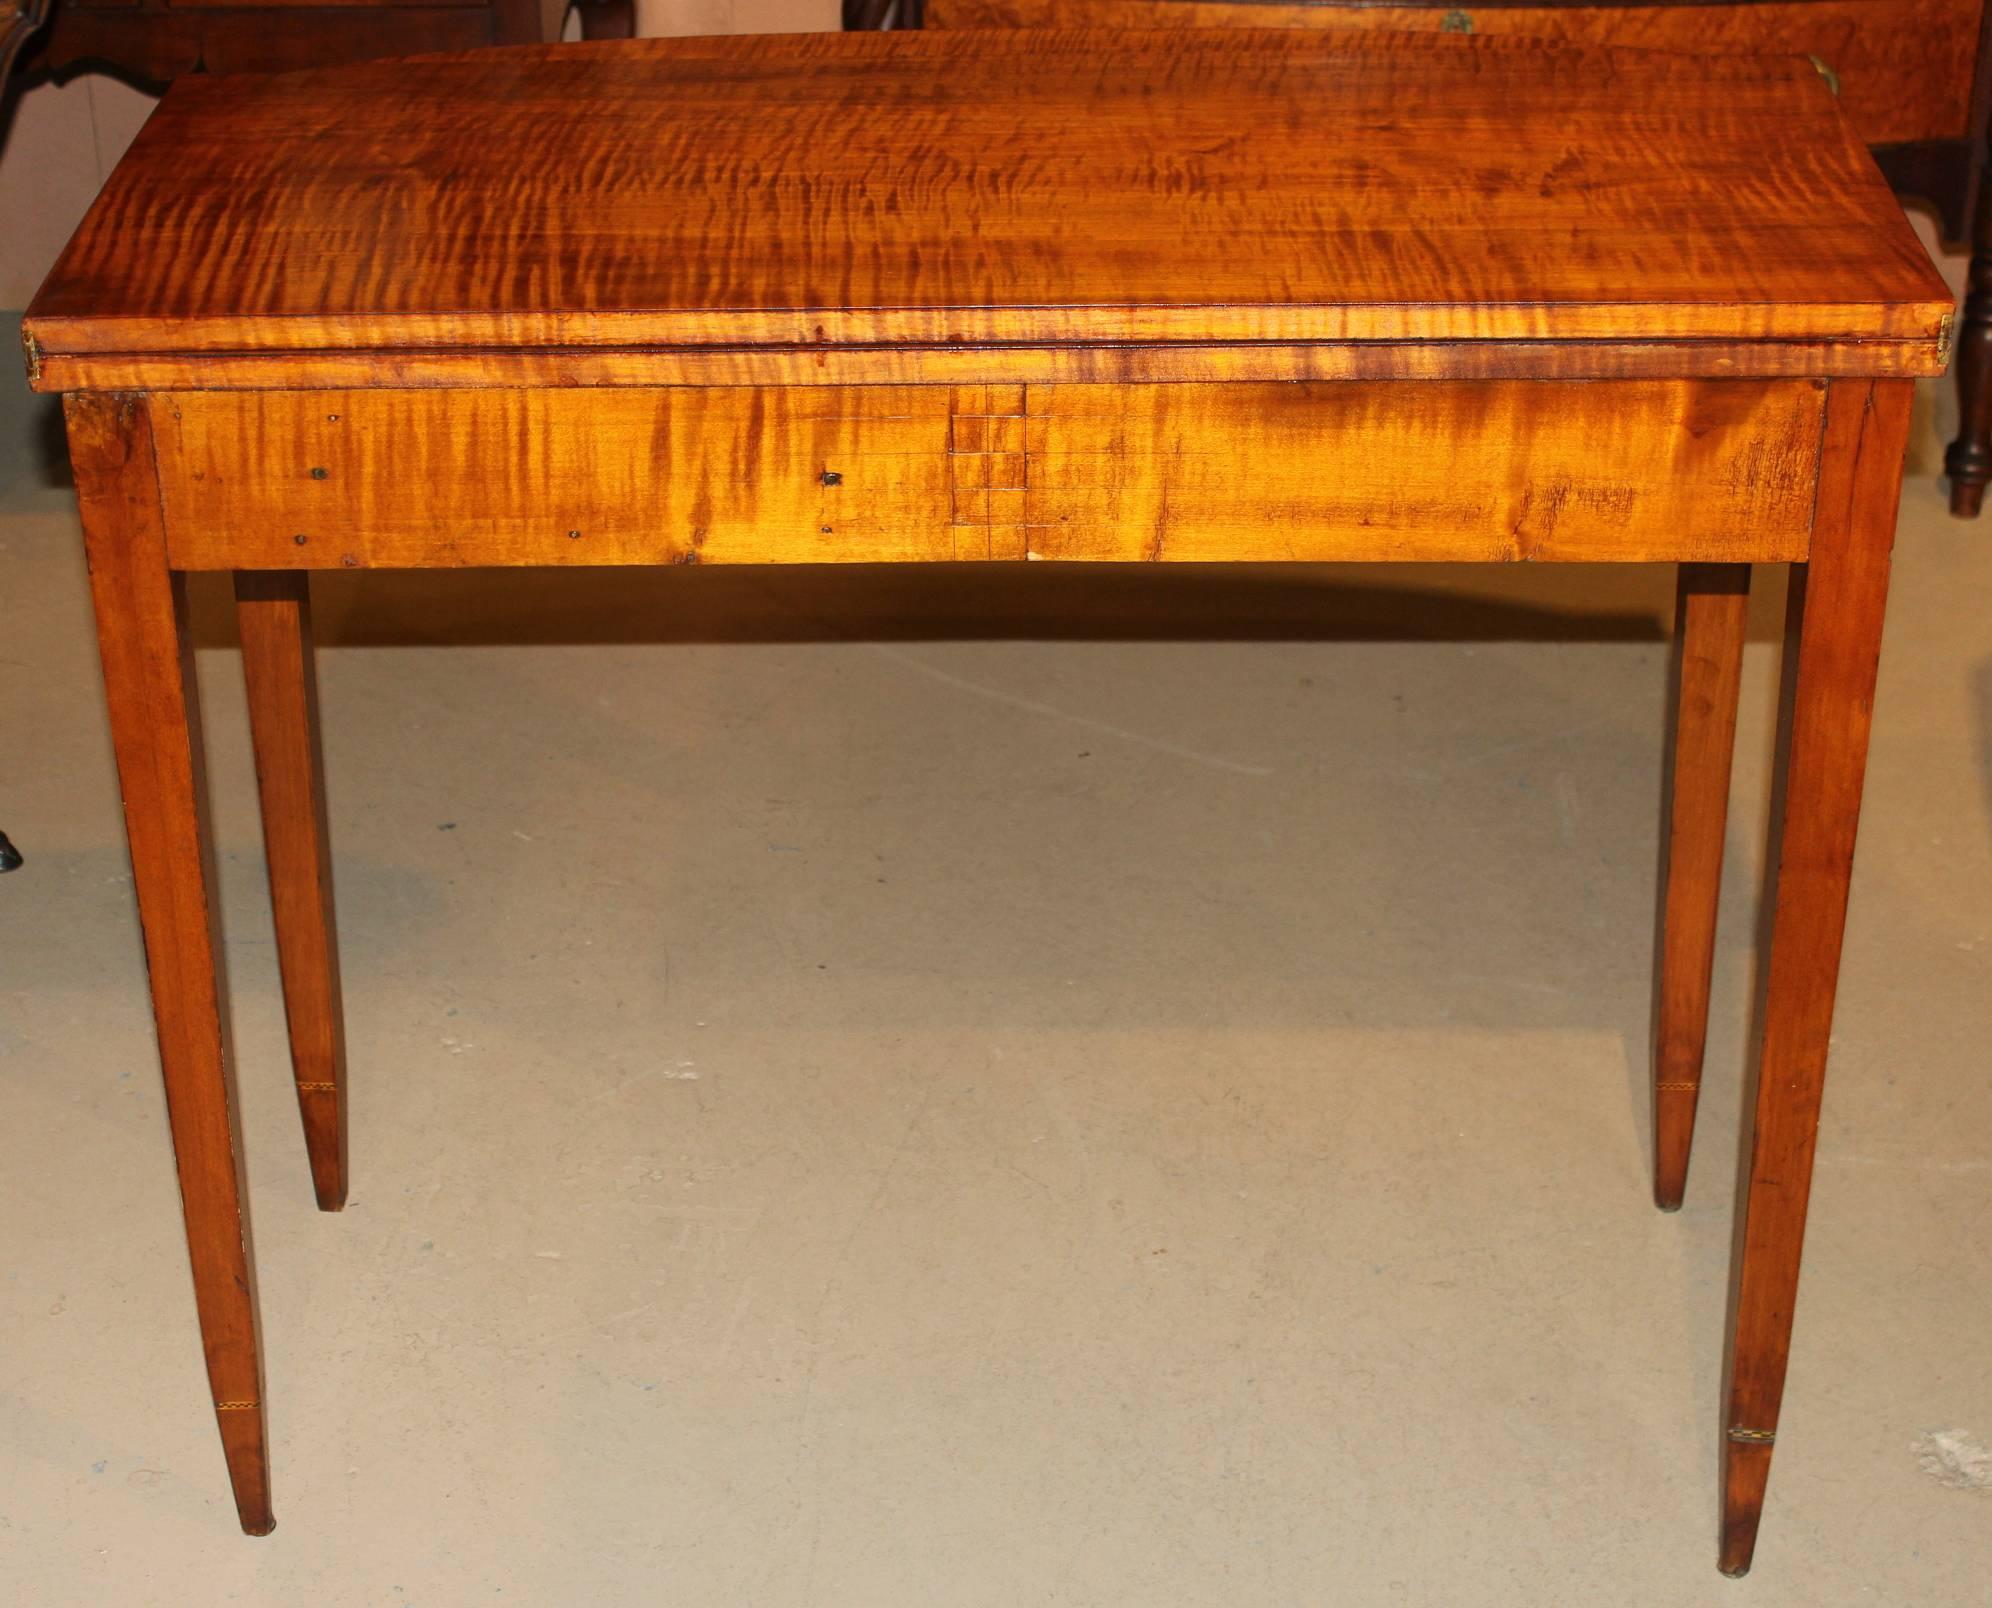 19th Century Federal Hepplewhite Tiger Maple Card or Gaming Table with Birdseye Maple Front